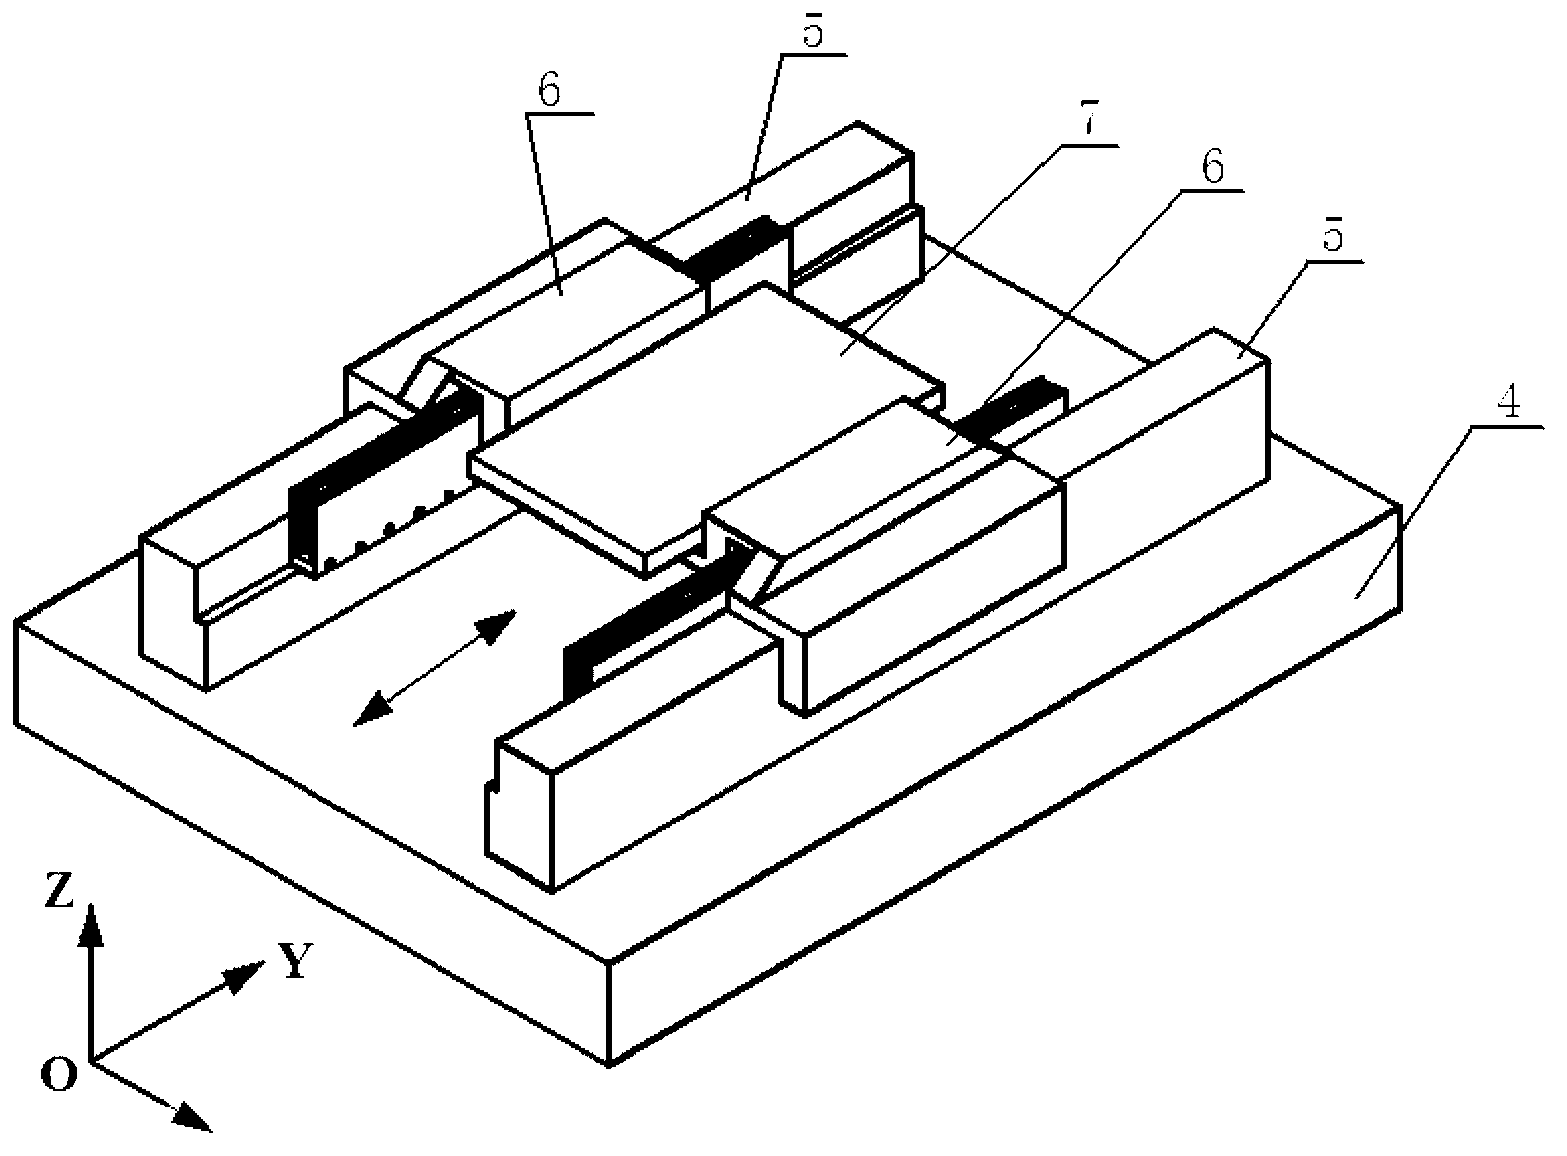 Positioning alignment apparatus of double-side driving workpiece platform without being connected by cross beam